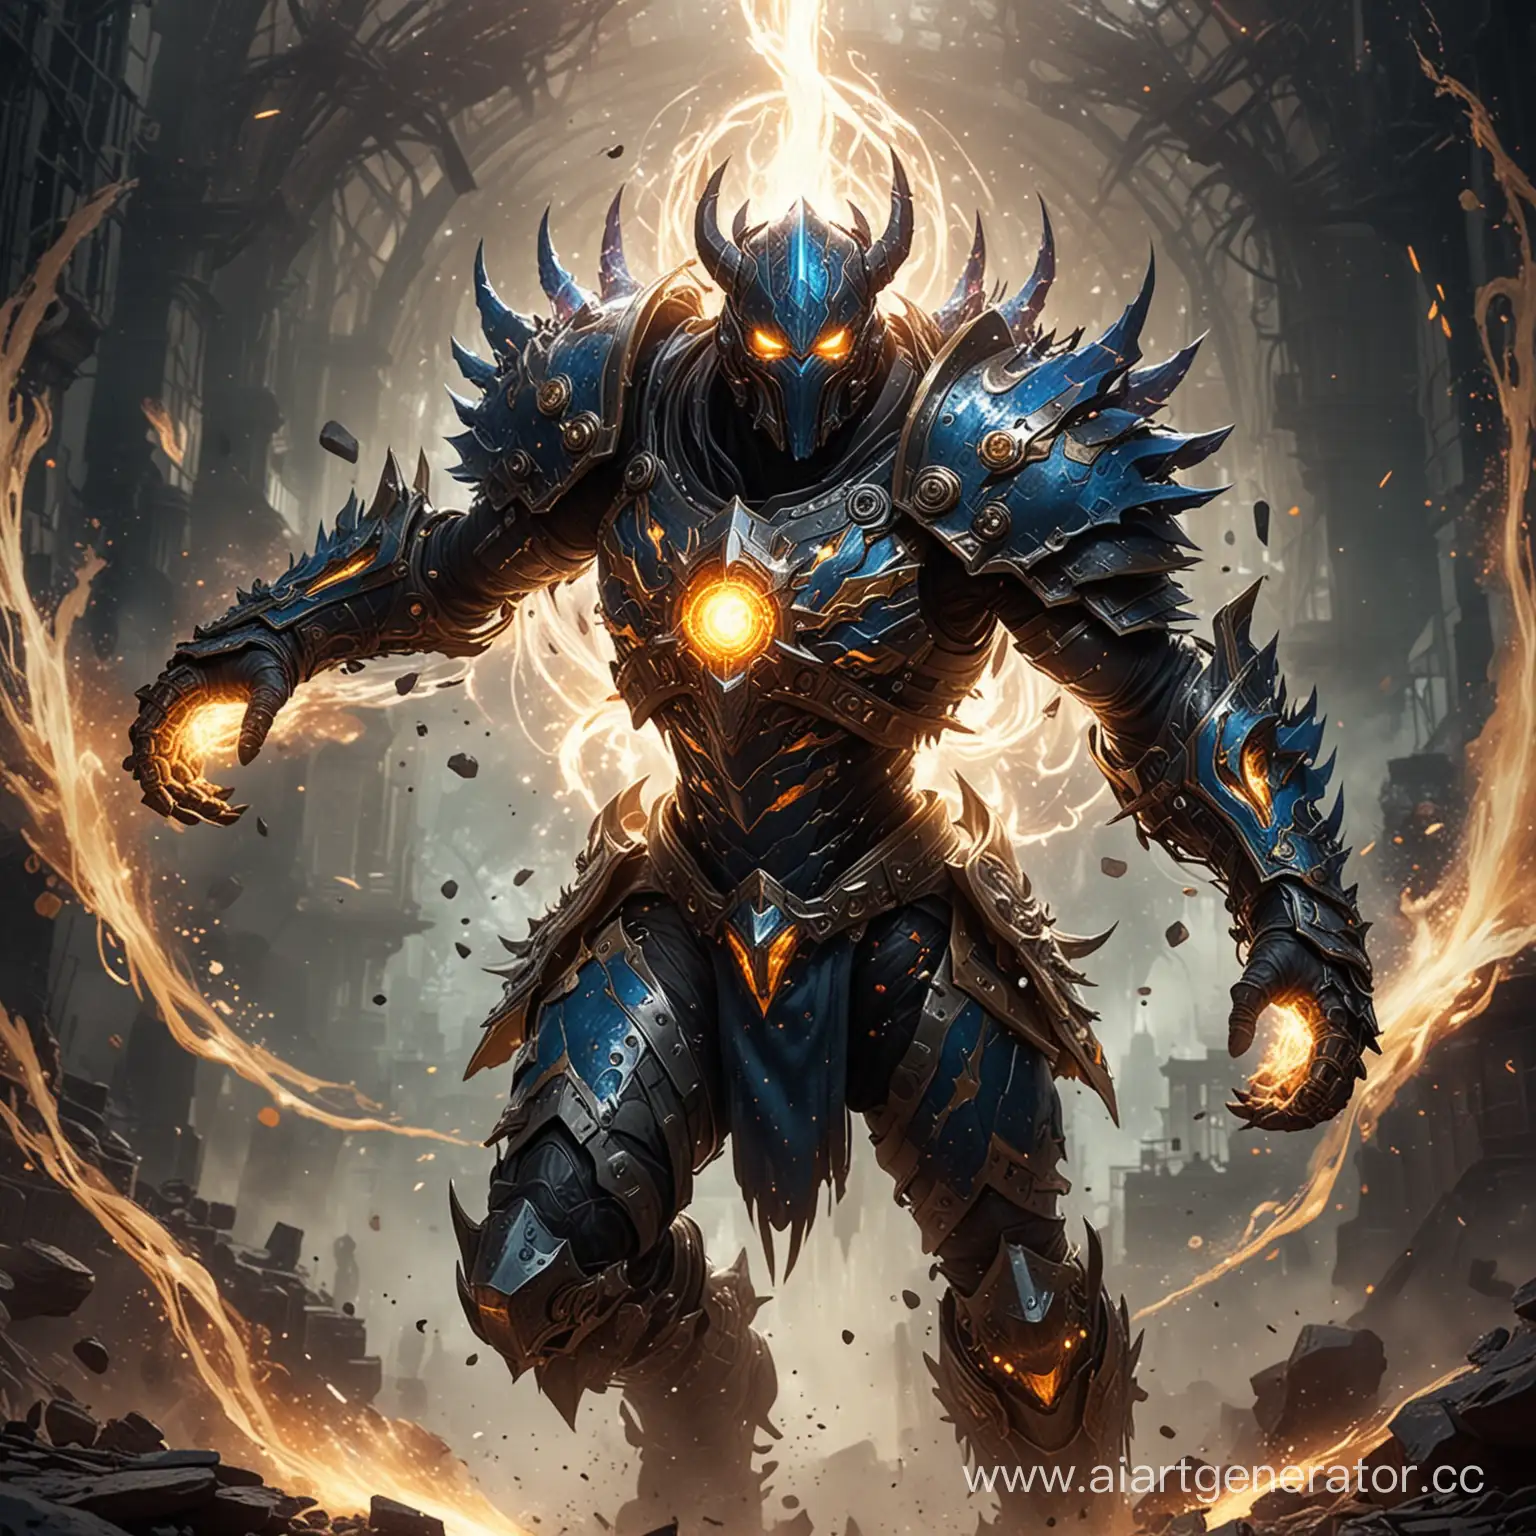 

Chaos Catalyst:He Seeds chaos and discord to fuel their power, wearing chaotic armor adorned with swirling vortex patterns and emanating discordant energy. Make it cinematic 